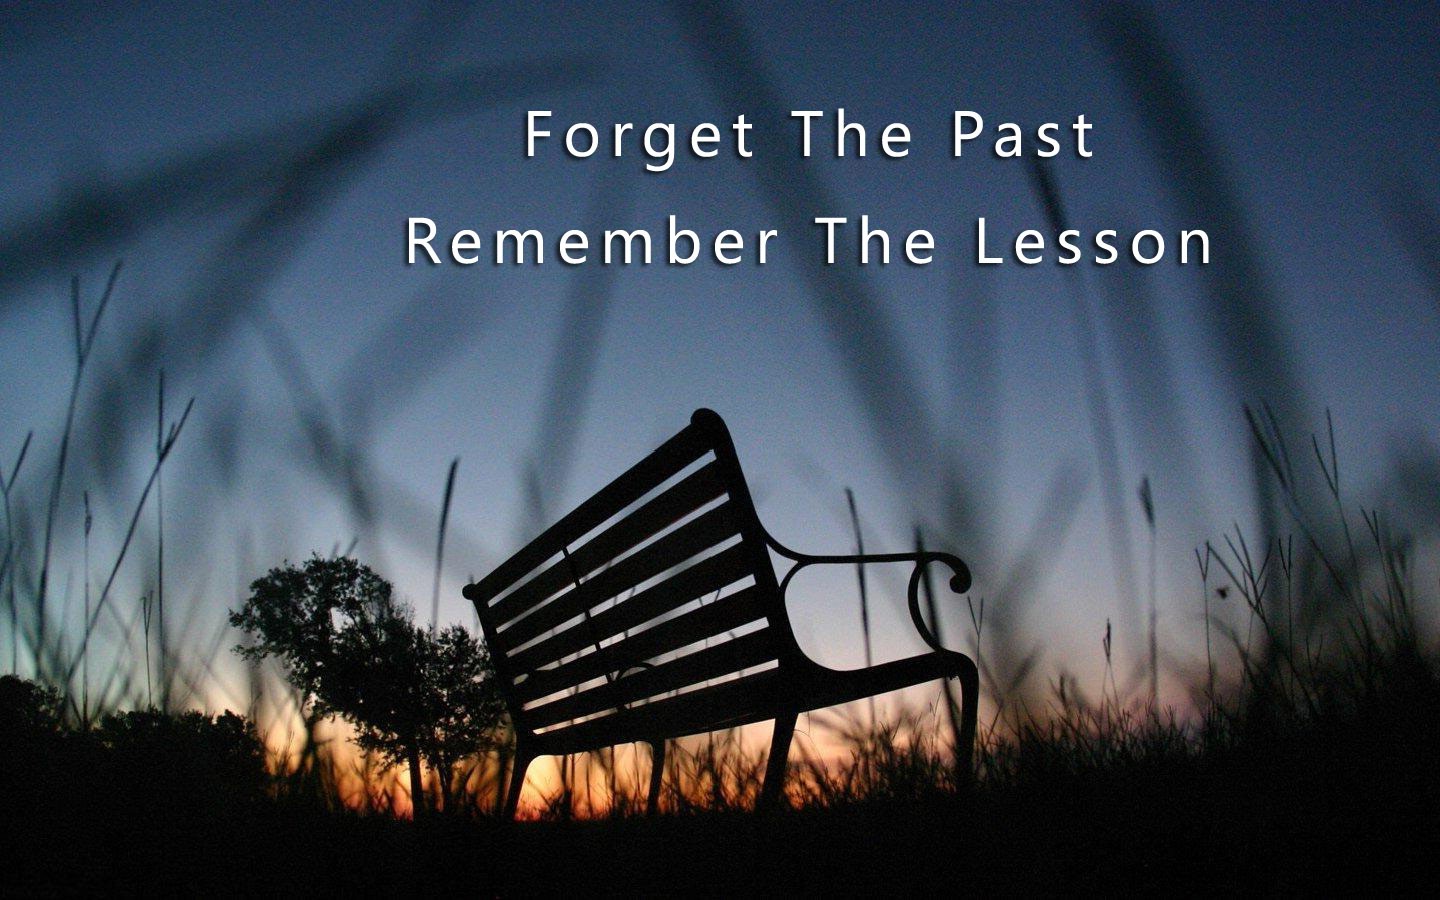 Good Wallpapers With Quotes - Forget The Past But Remember The Lesson Meaning In - HD Wallpaper 